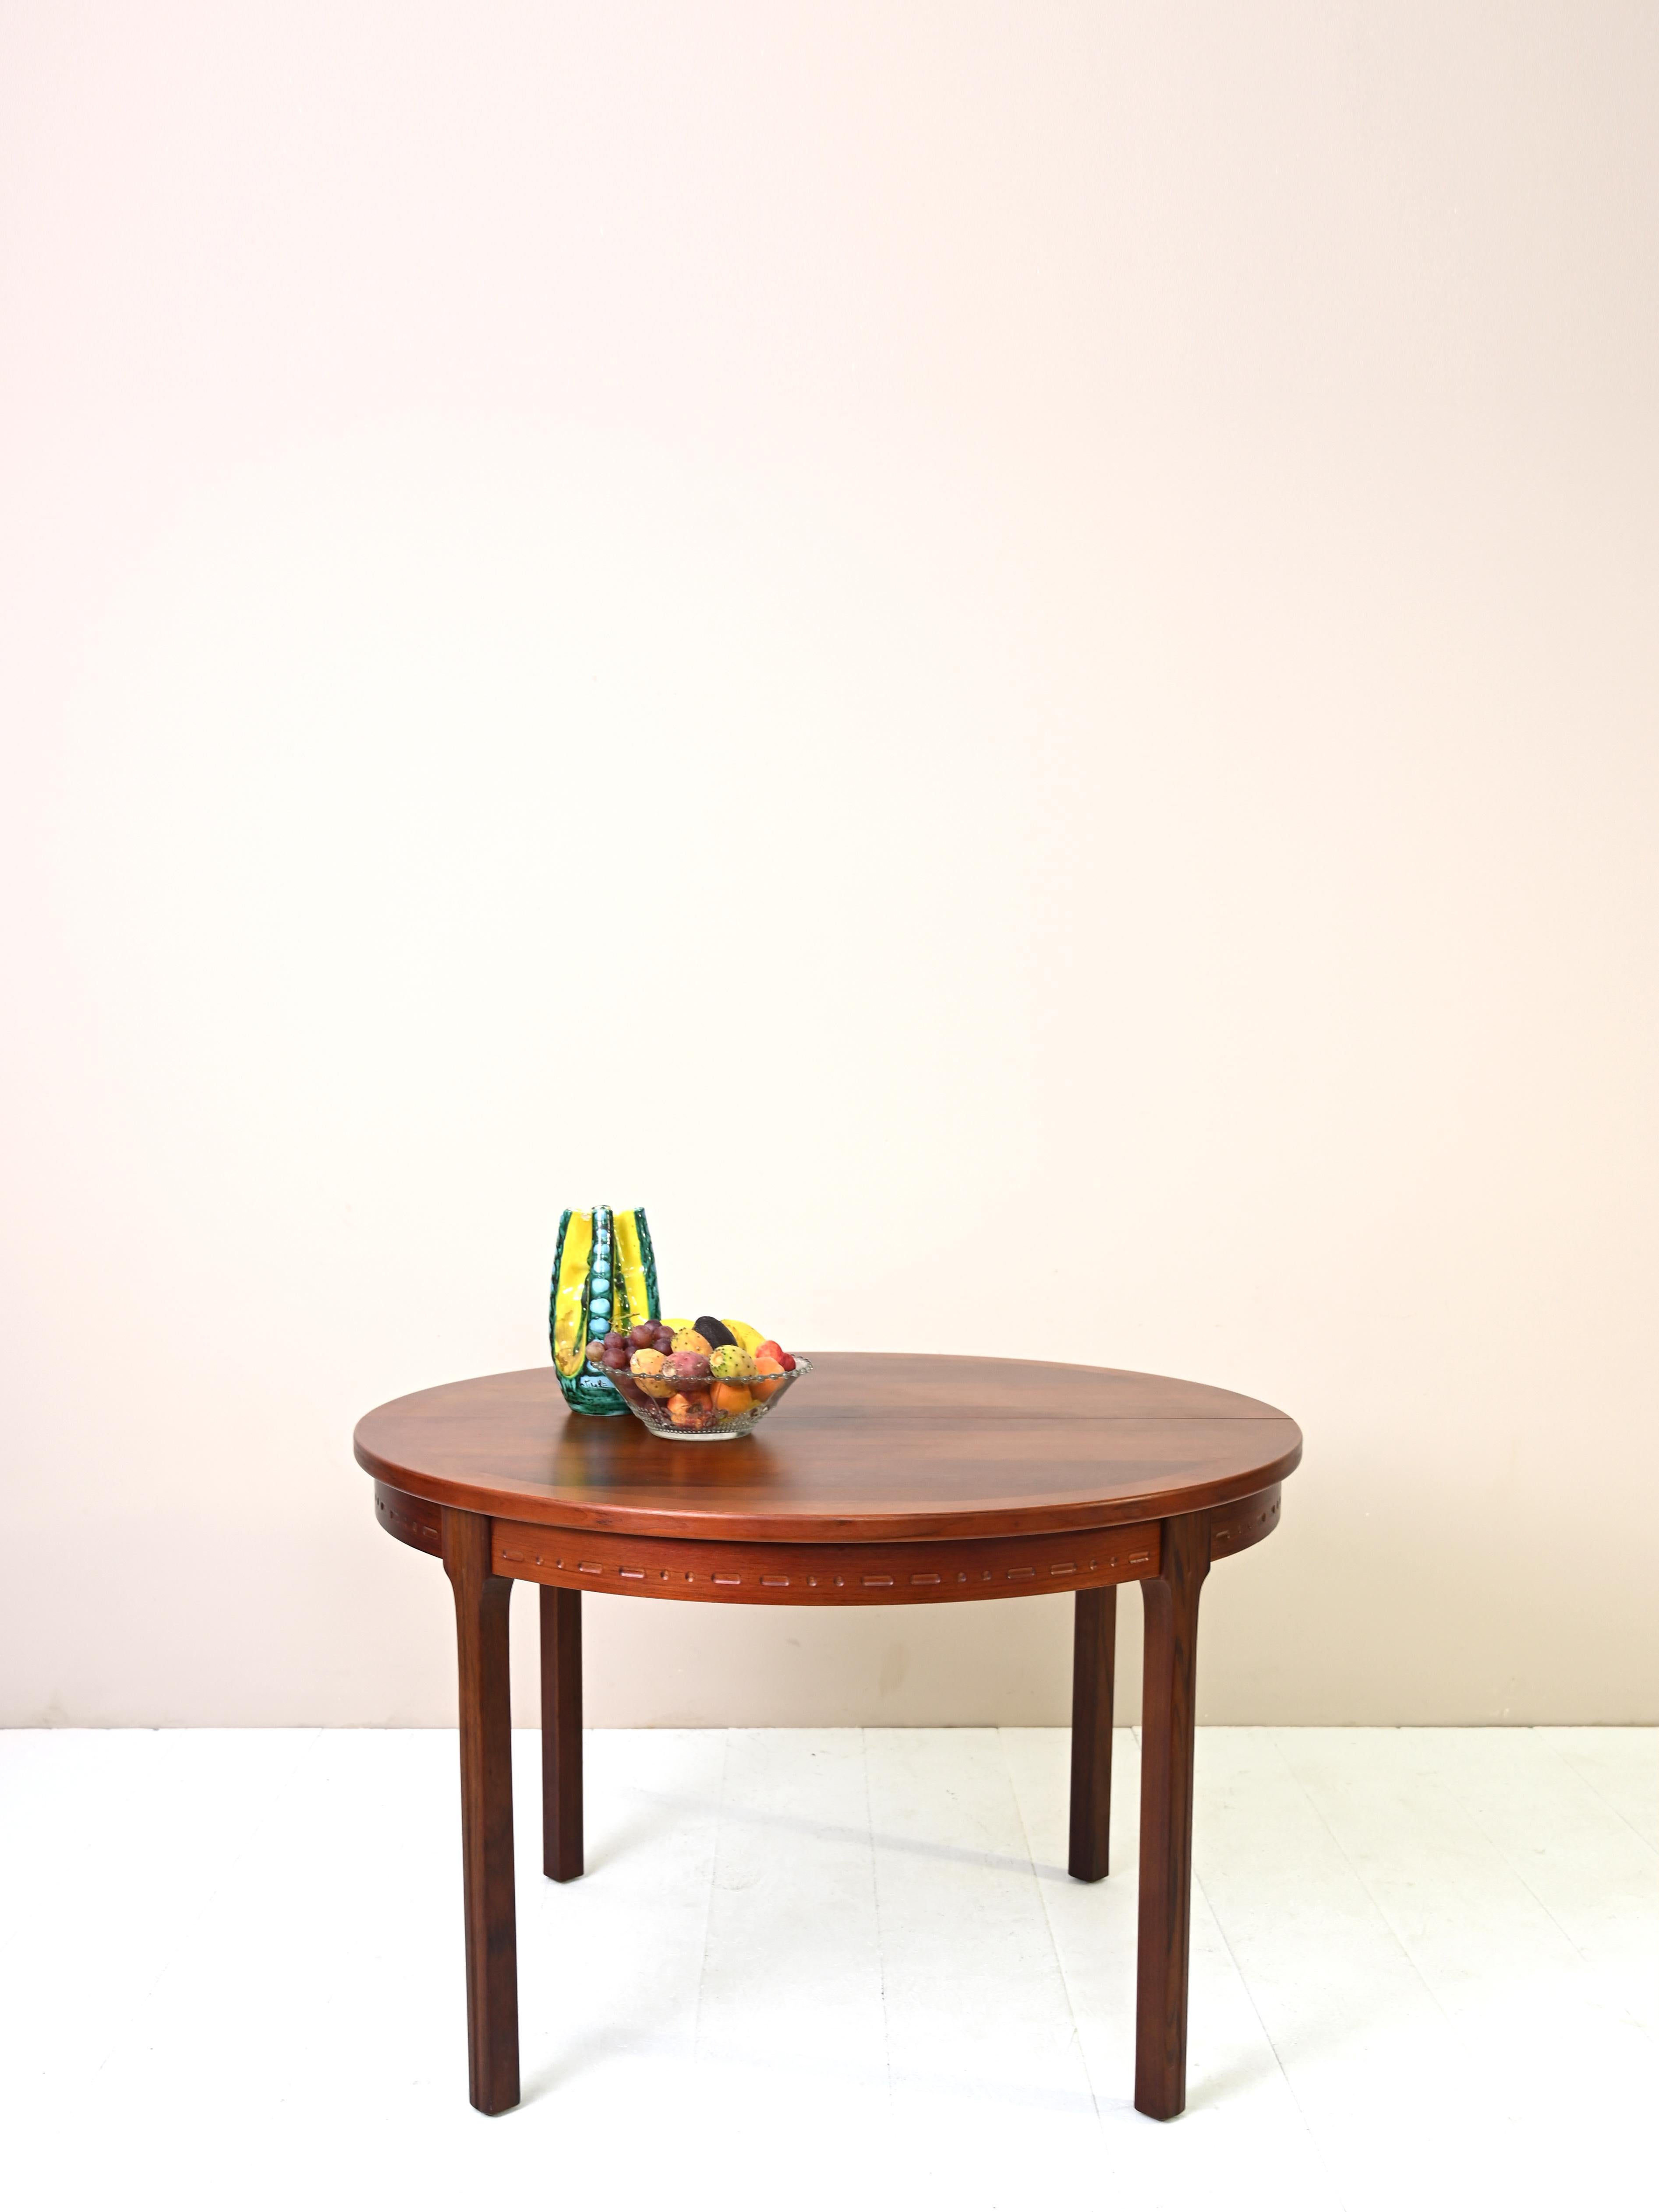 Vintage dining table designed by Swedish designer Nils Jonsson in the 1970s.

The dining table is round in shape with a diameter of 115cm, thanks to the two 40cm planks it reaches a length of 195cm.

The elegance in shape and the marked grain,